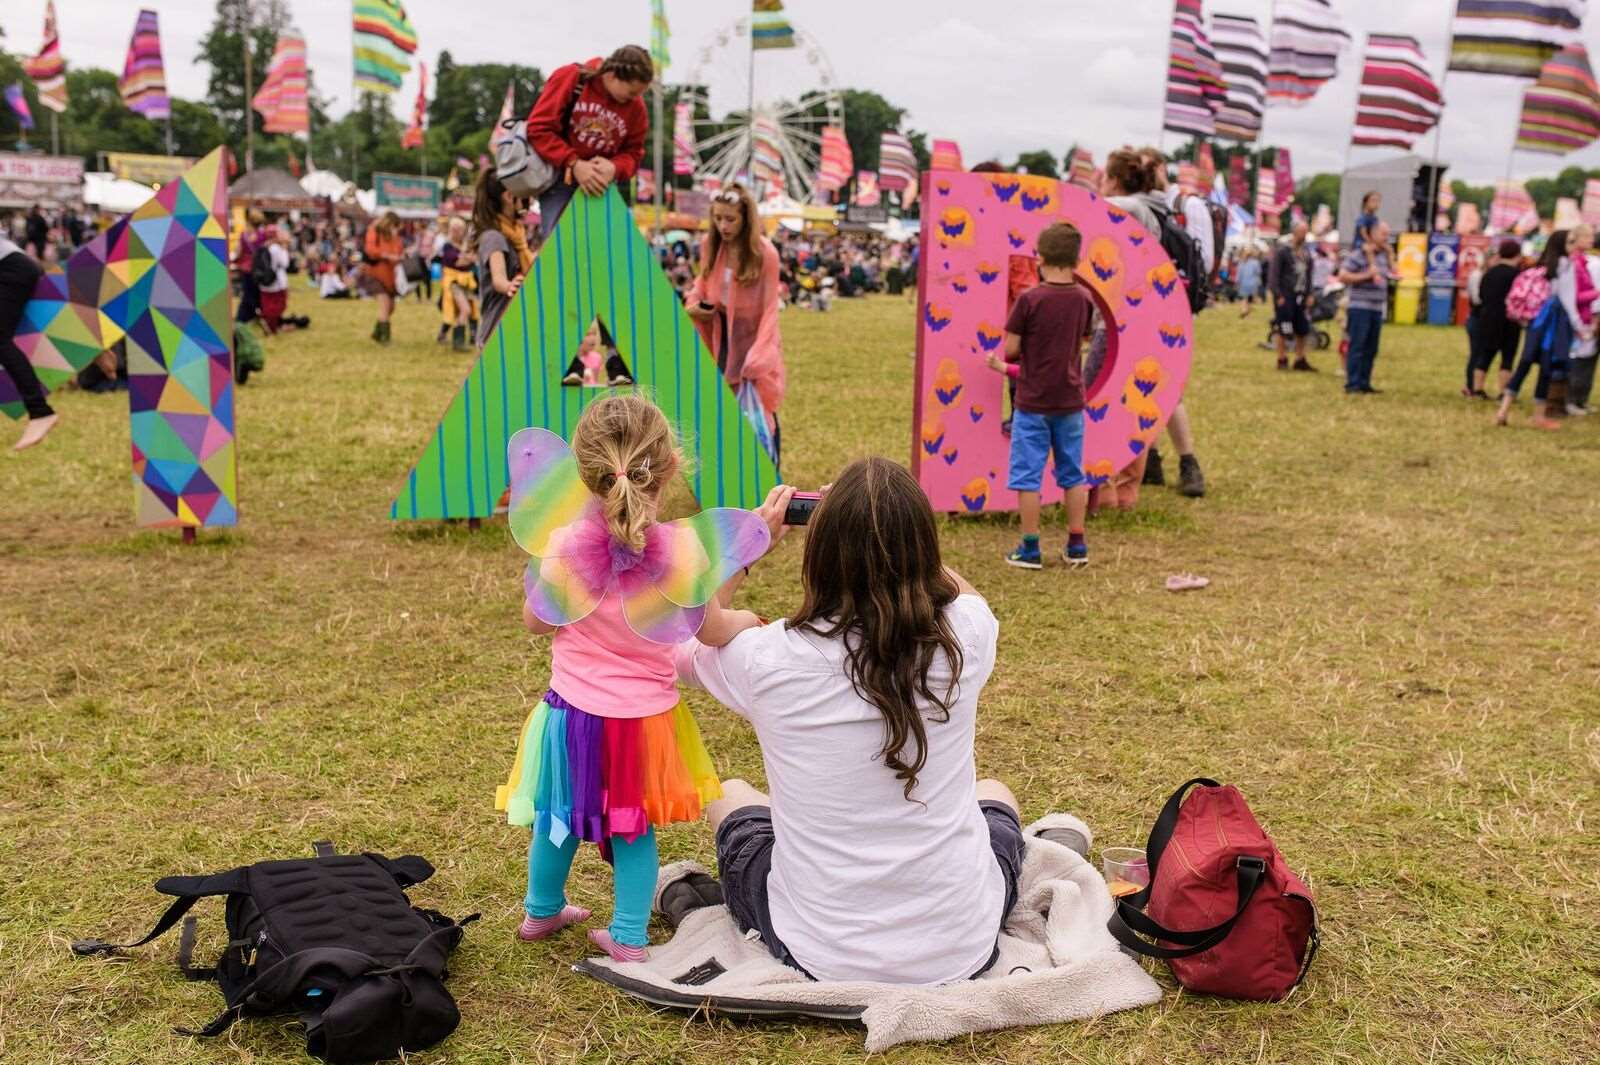 The children's field at Womad was a hit